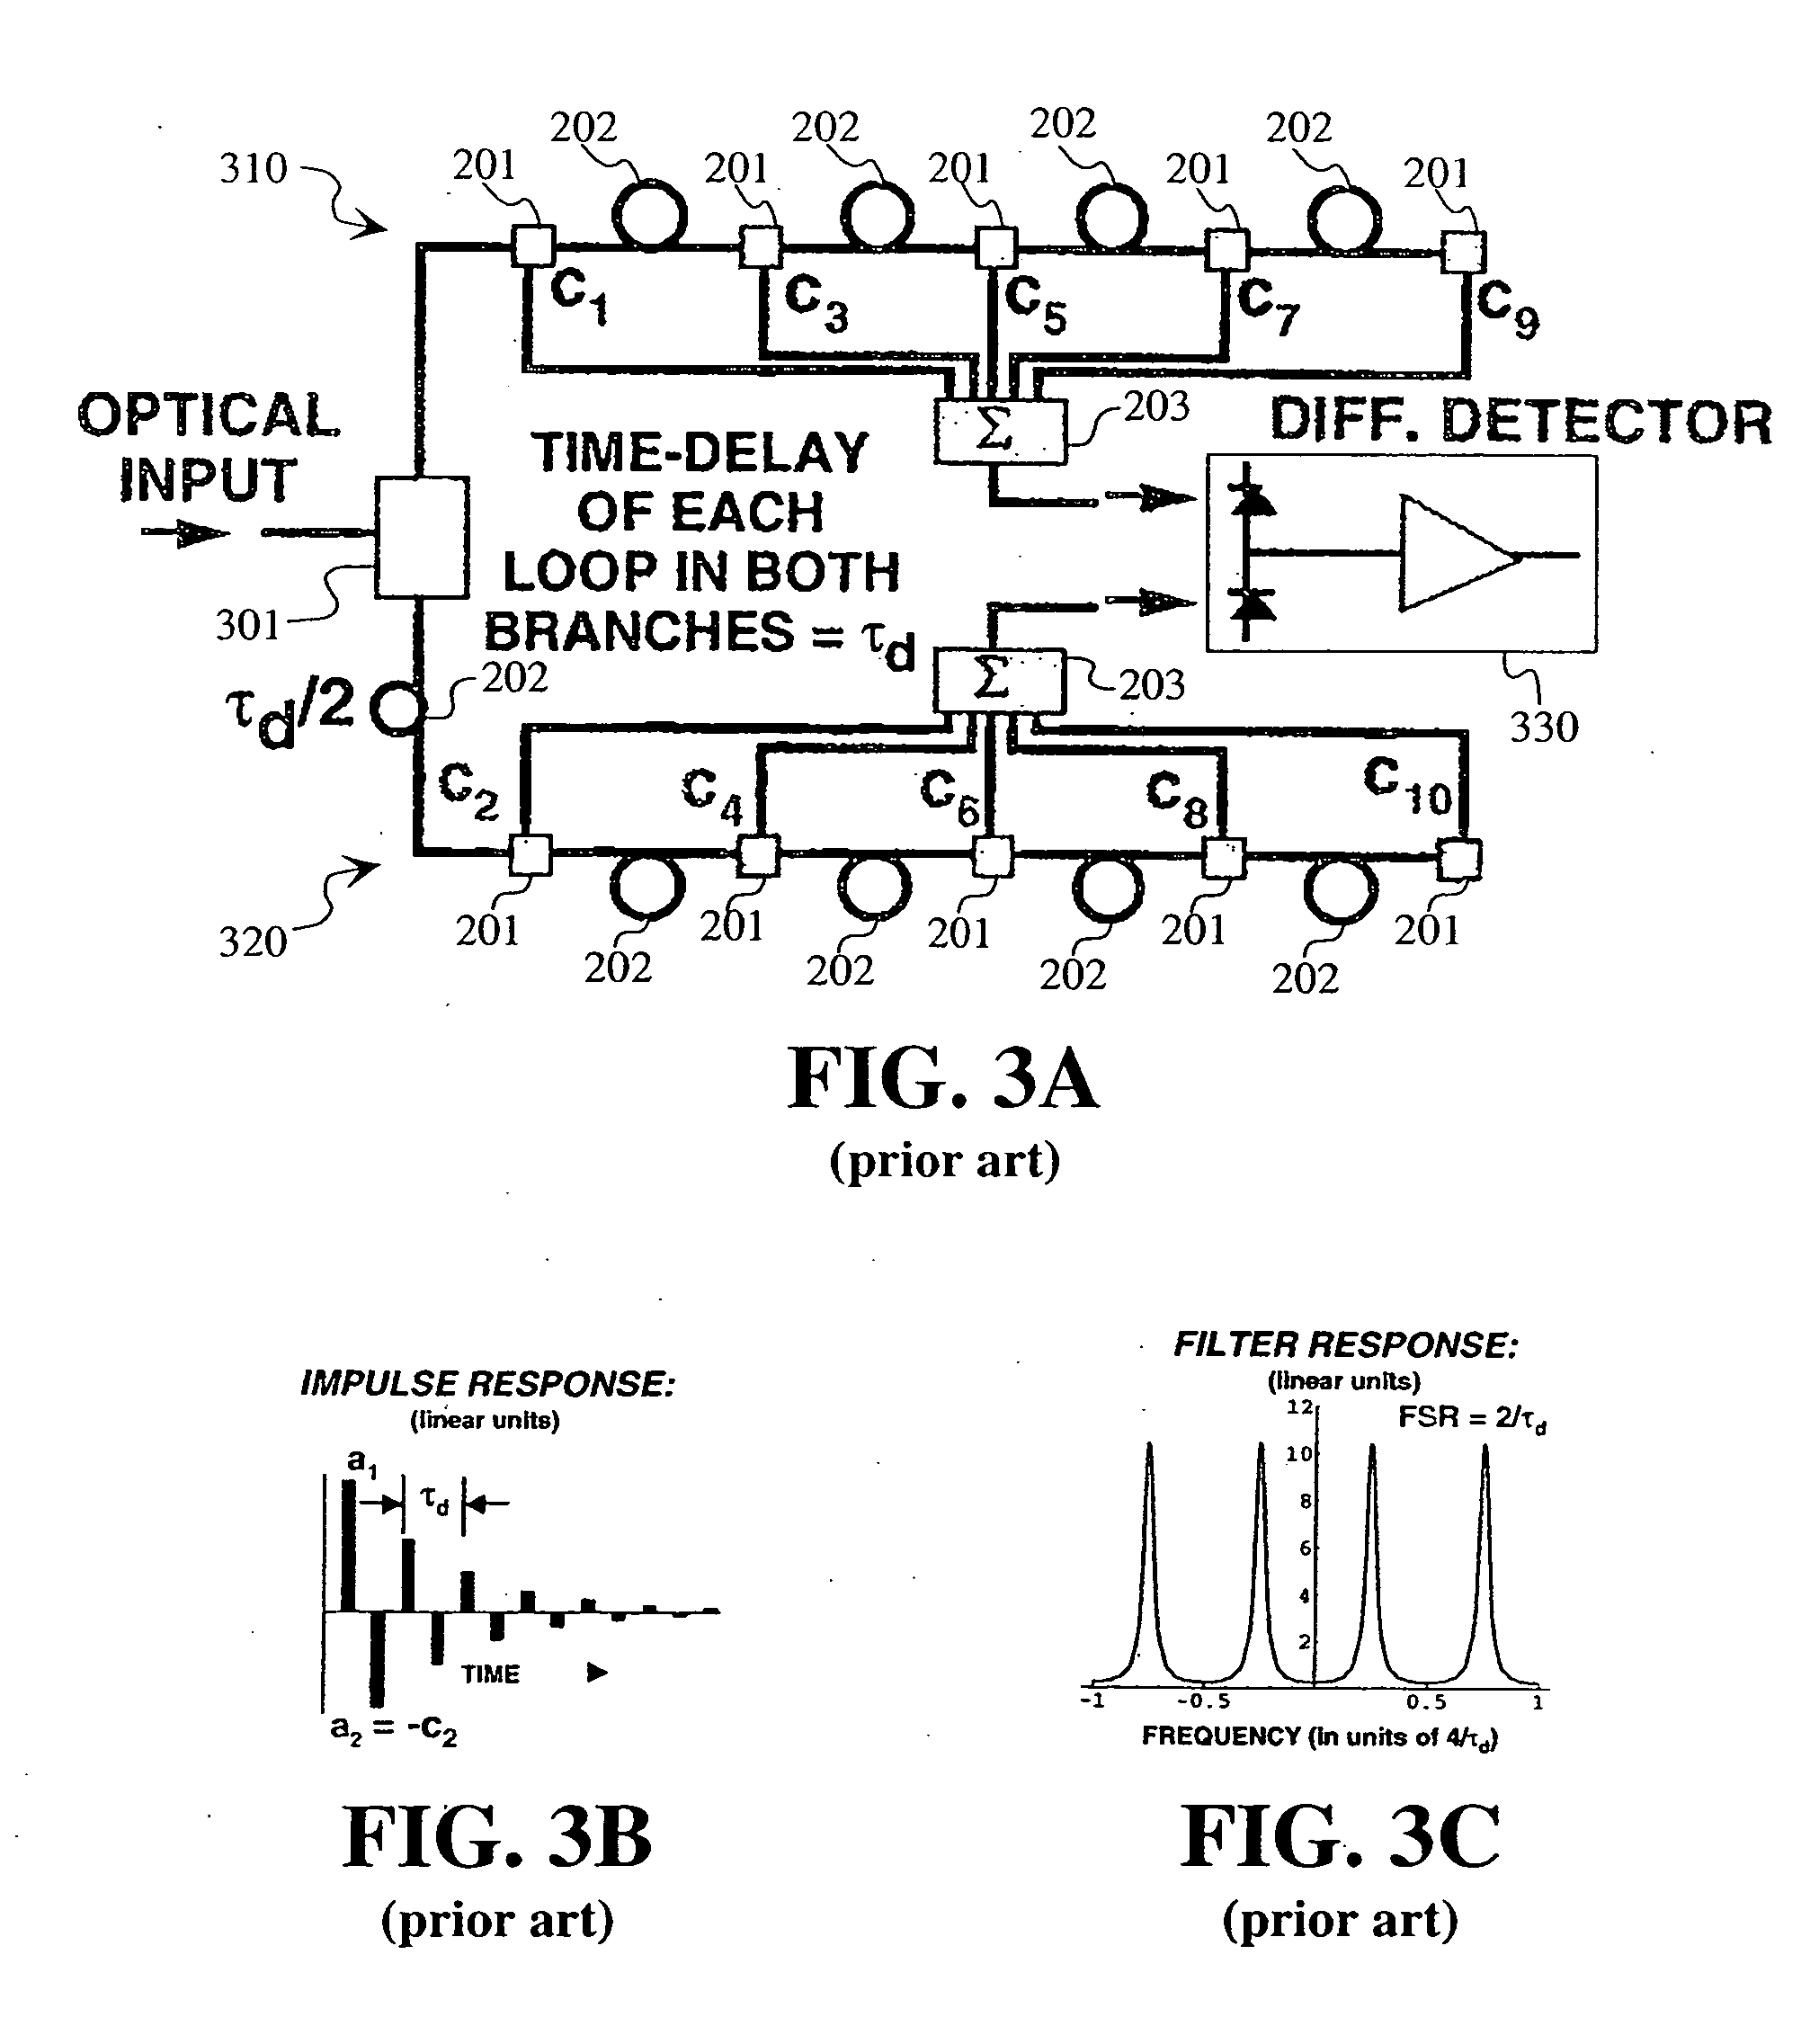 Bipolar RF-photonic transversal filter with dynamically reconfigurable passbands